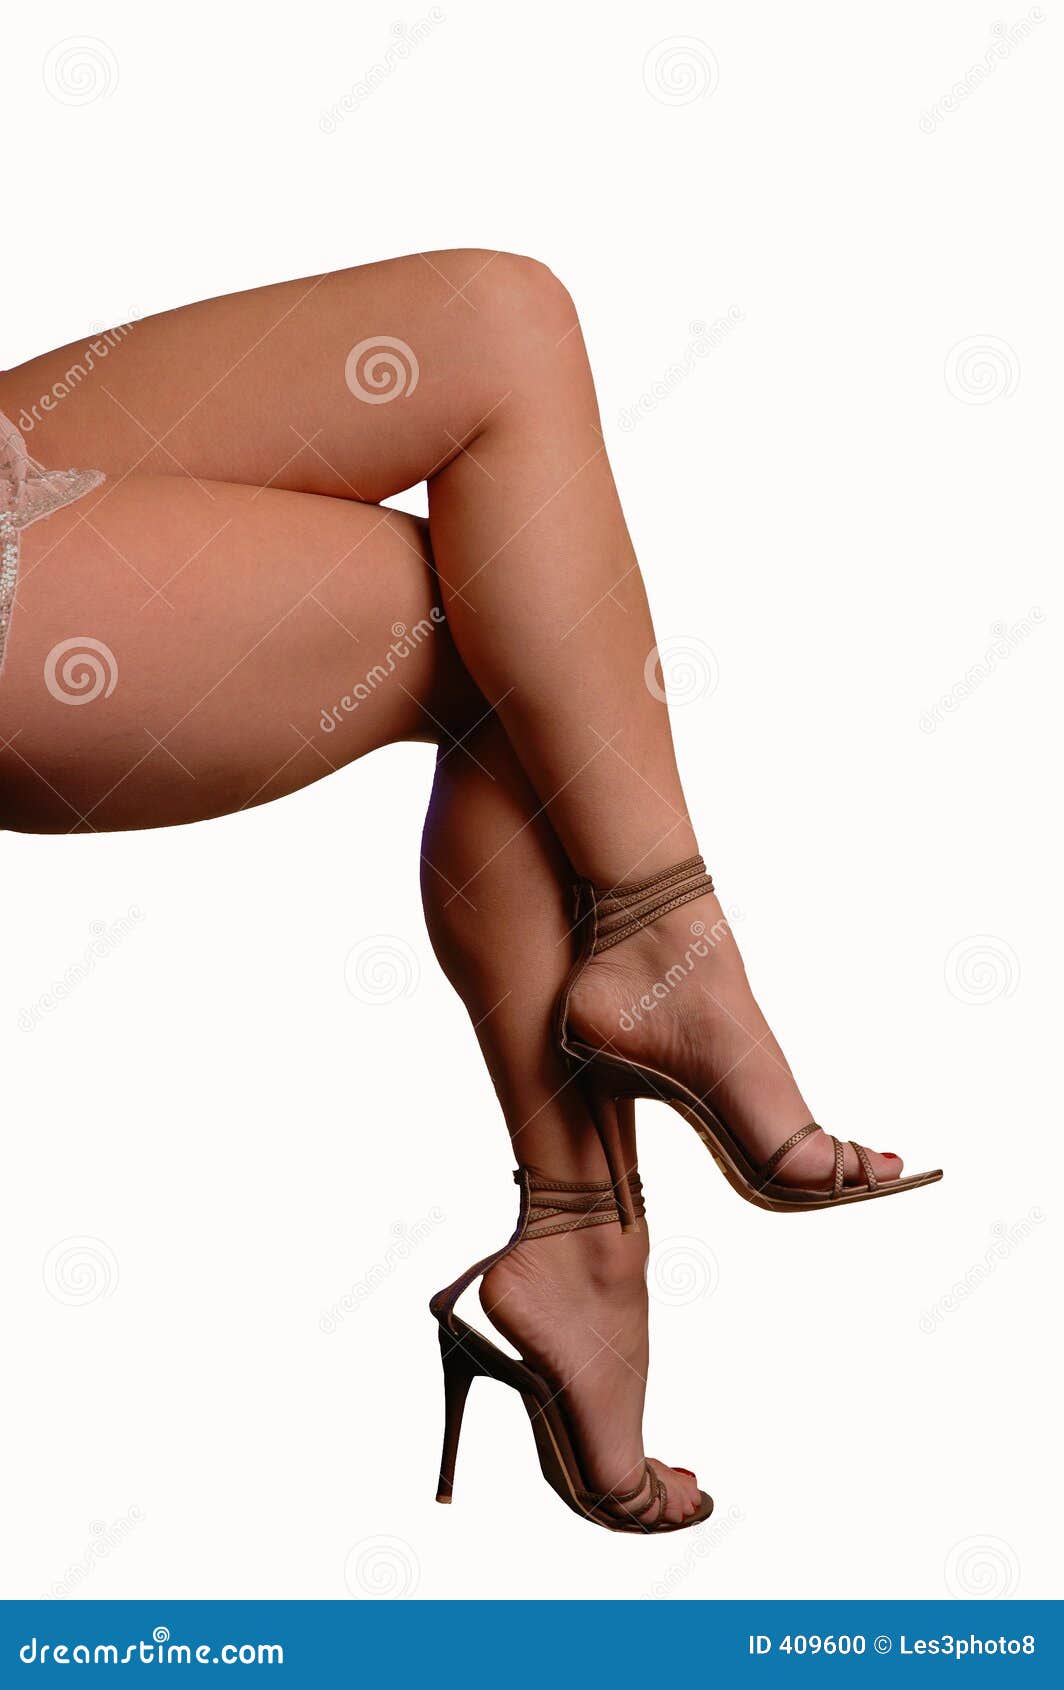 bailey ward recommends women with hot legs pic